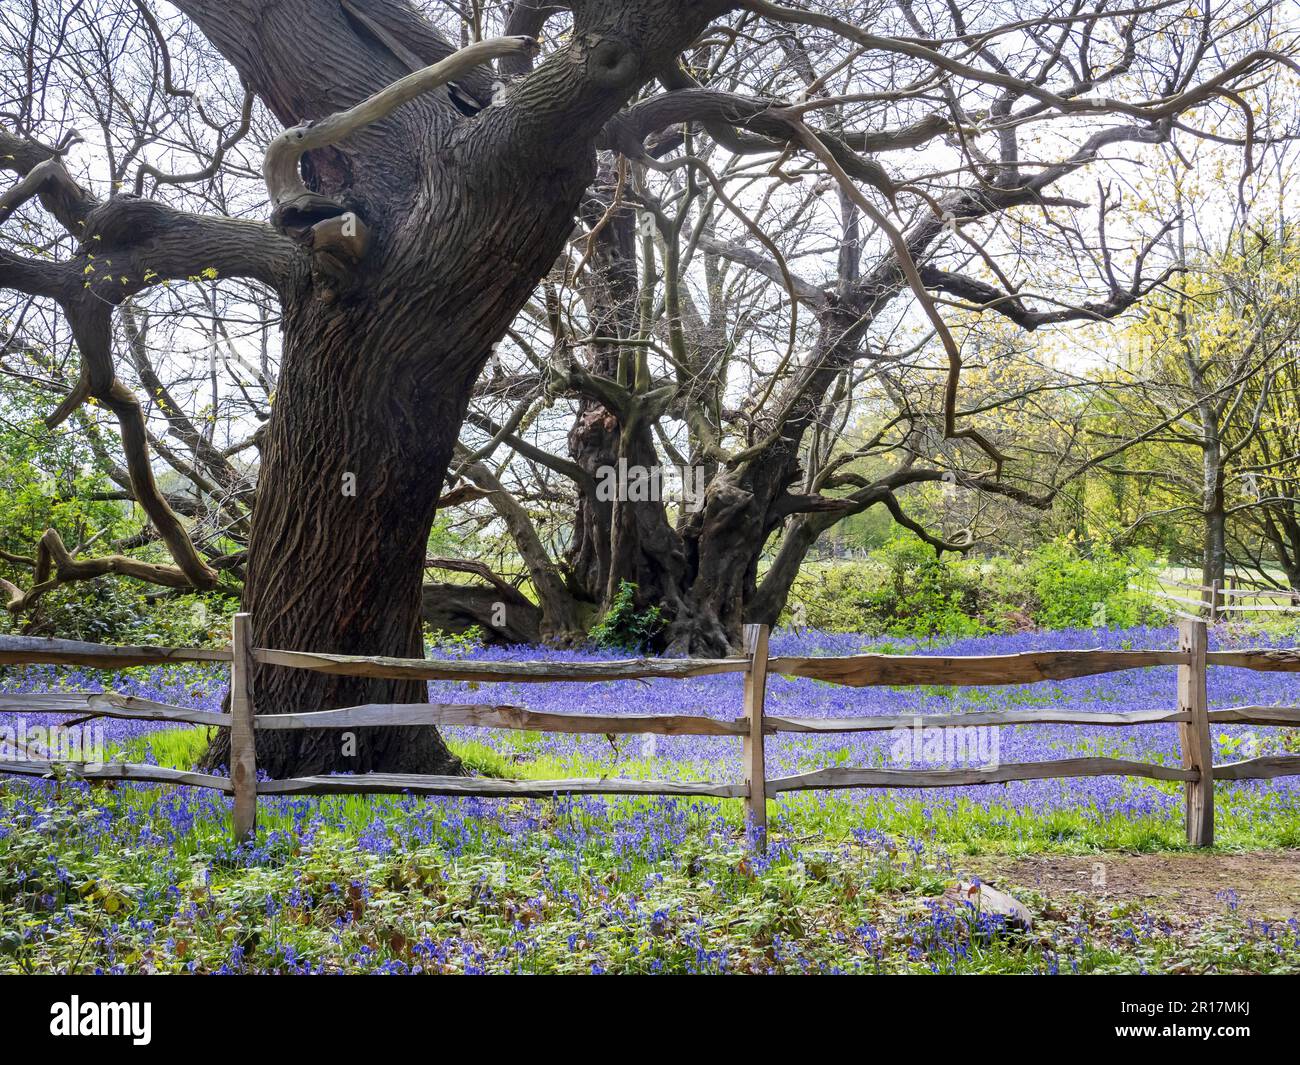 Bluebells and an ancient Small Leaved Lime, Tilia cordata in the grounds of Blickling Hall near Aylesham, norfolk, UK. Stock Photo